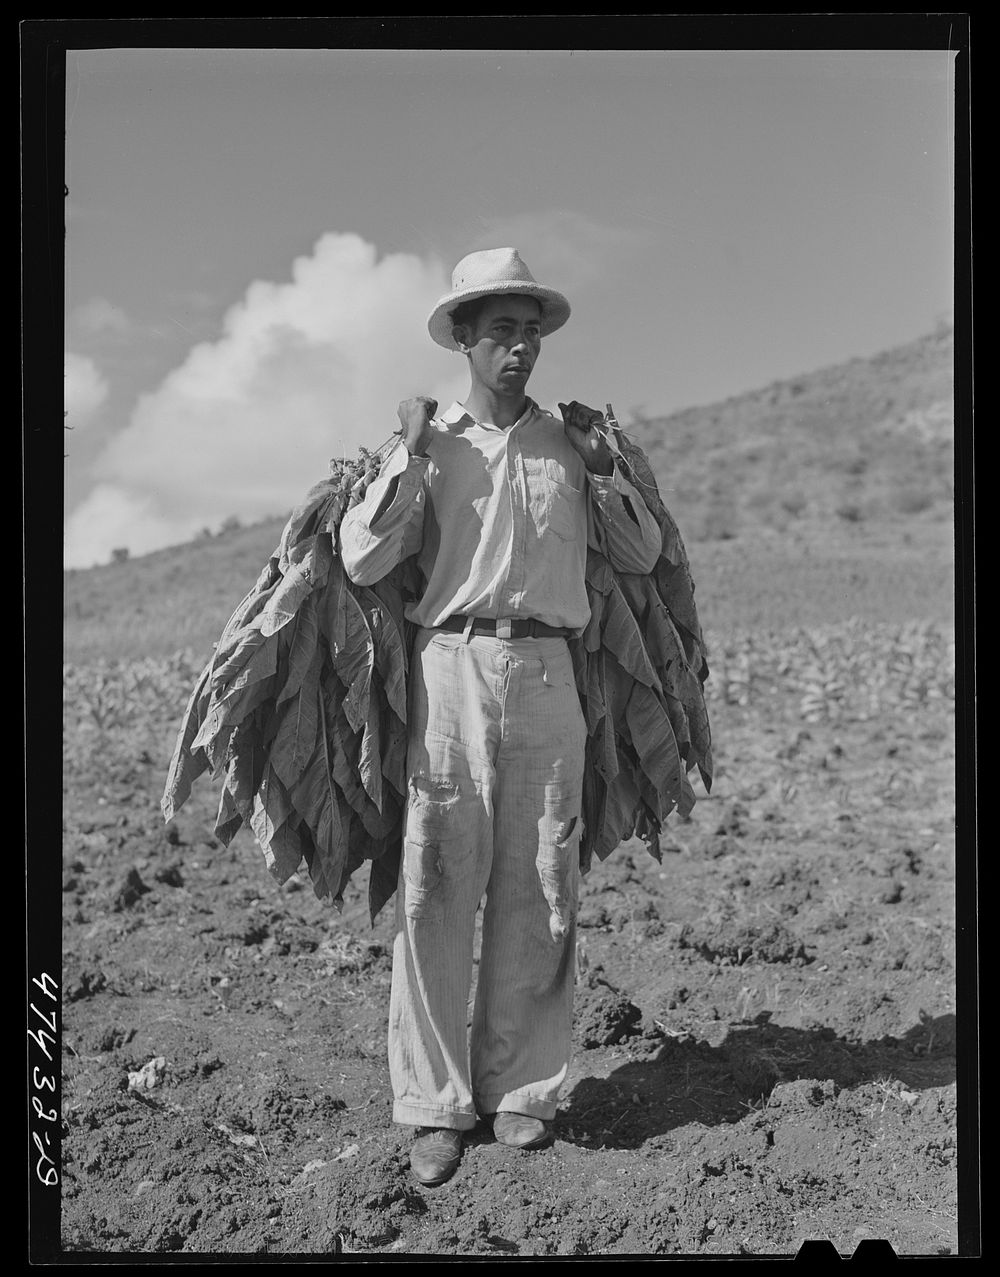 Guanica, Puero Rico (vicinity). Tobacco being harvested in a field. Sourced from the Library of Congress.